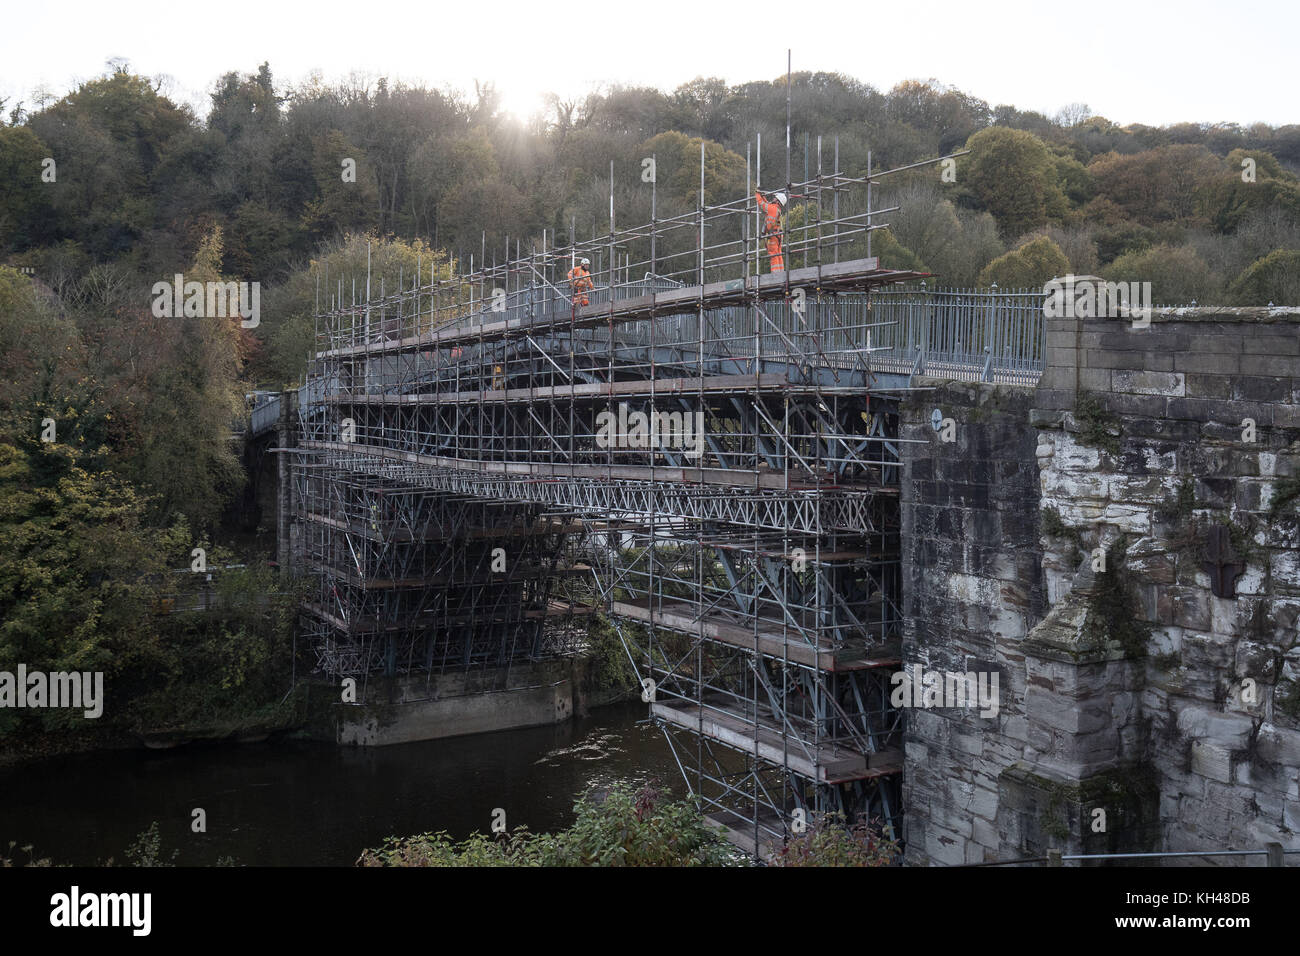 Specialist conservators working for English Heritage begin vital repair work on Iron Bridge, over the River Severn in Shropshire, in a £3.6 million project to conserve it. The bridge, erected in 1779, was the first single span arch bridge in the world to be made of cast iron and marked a turning point in British engineering. Stock Photo